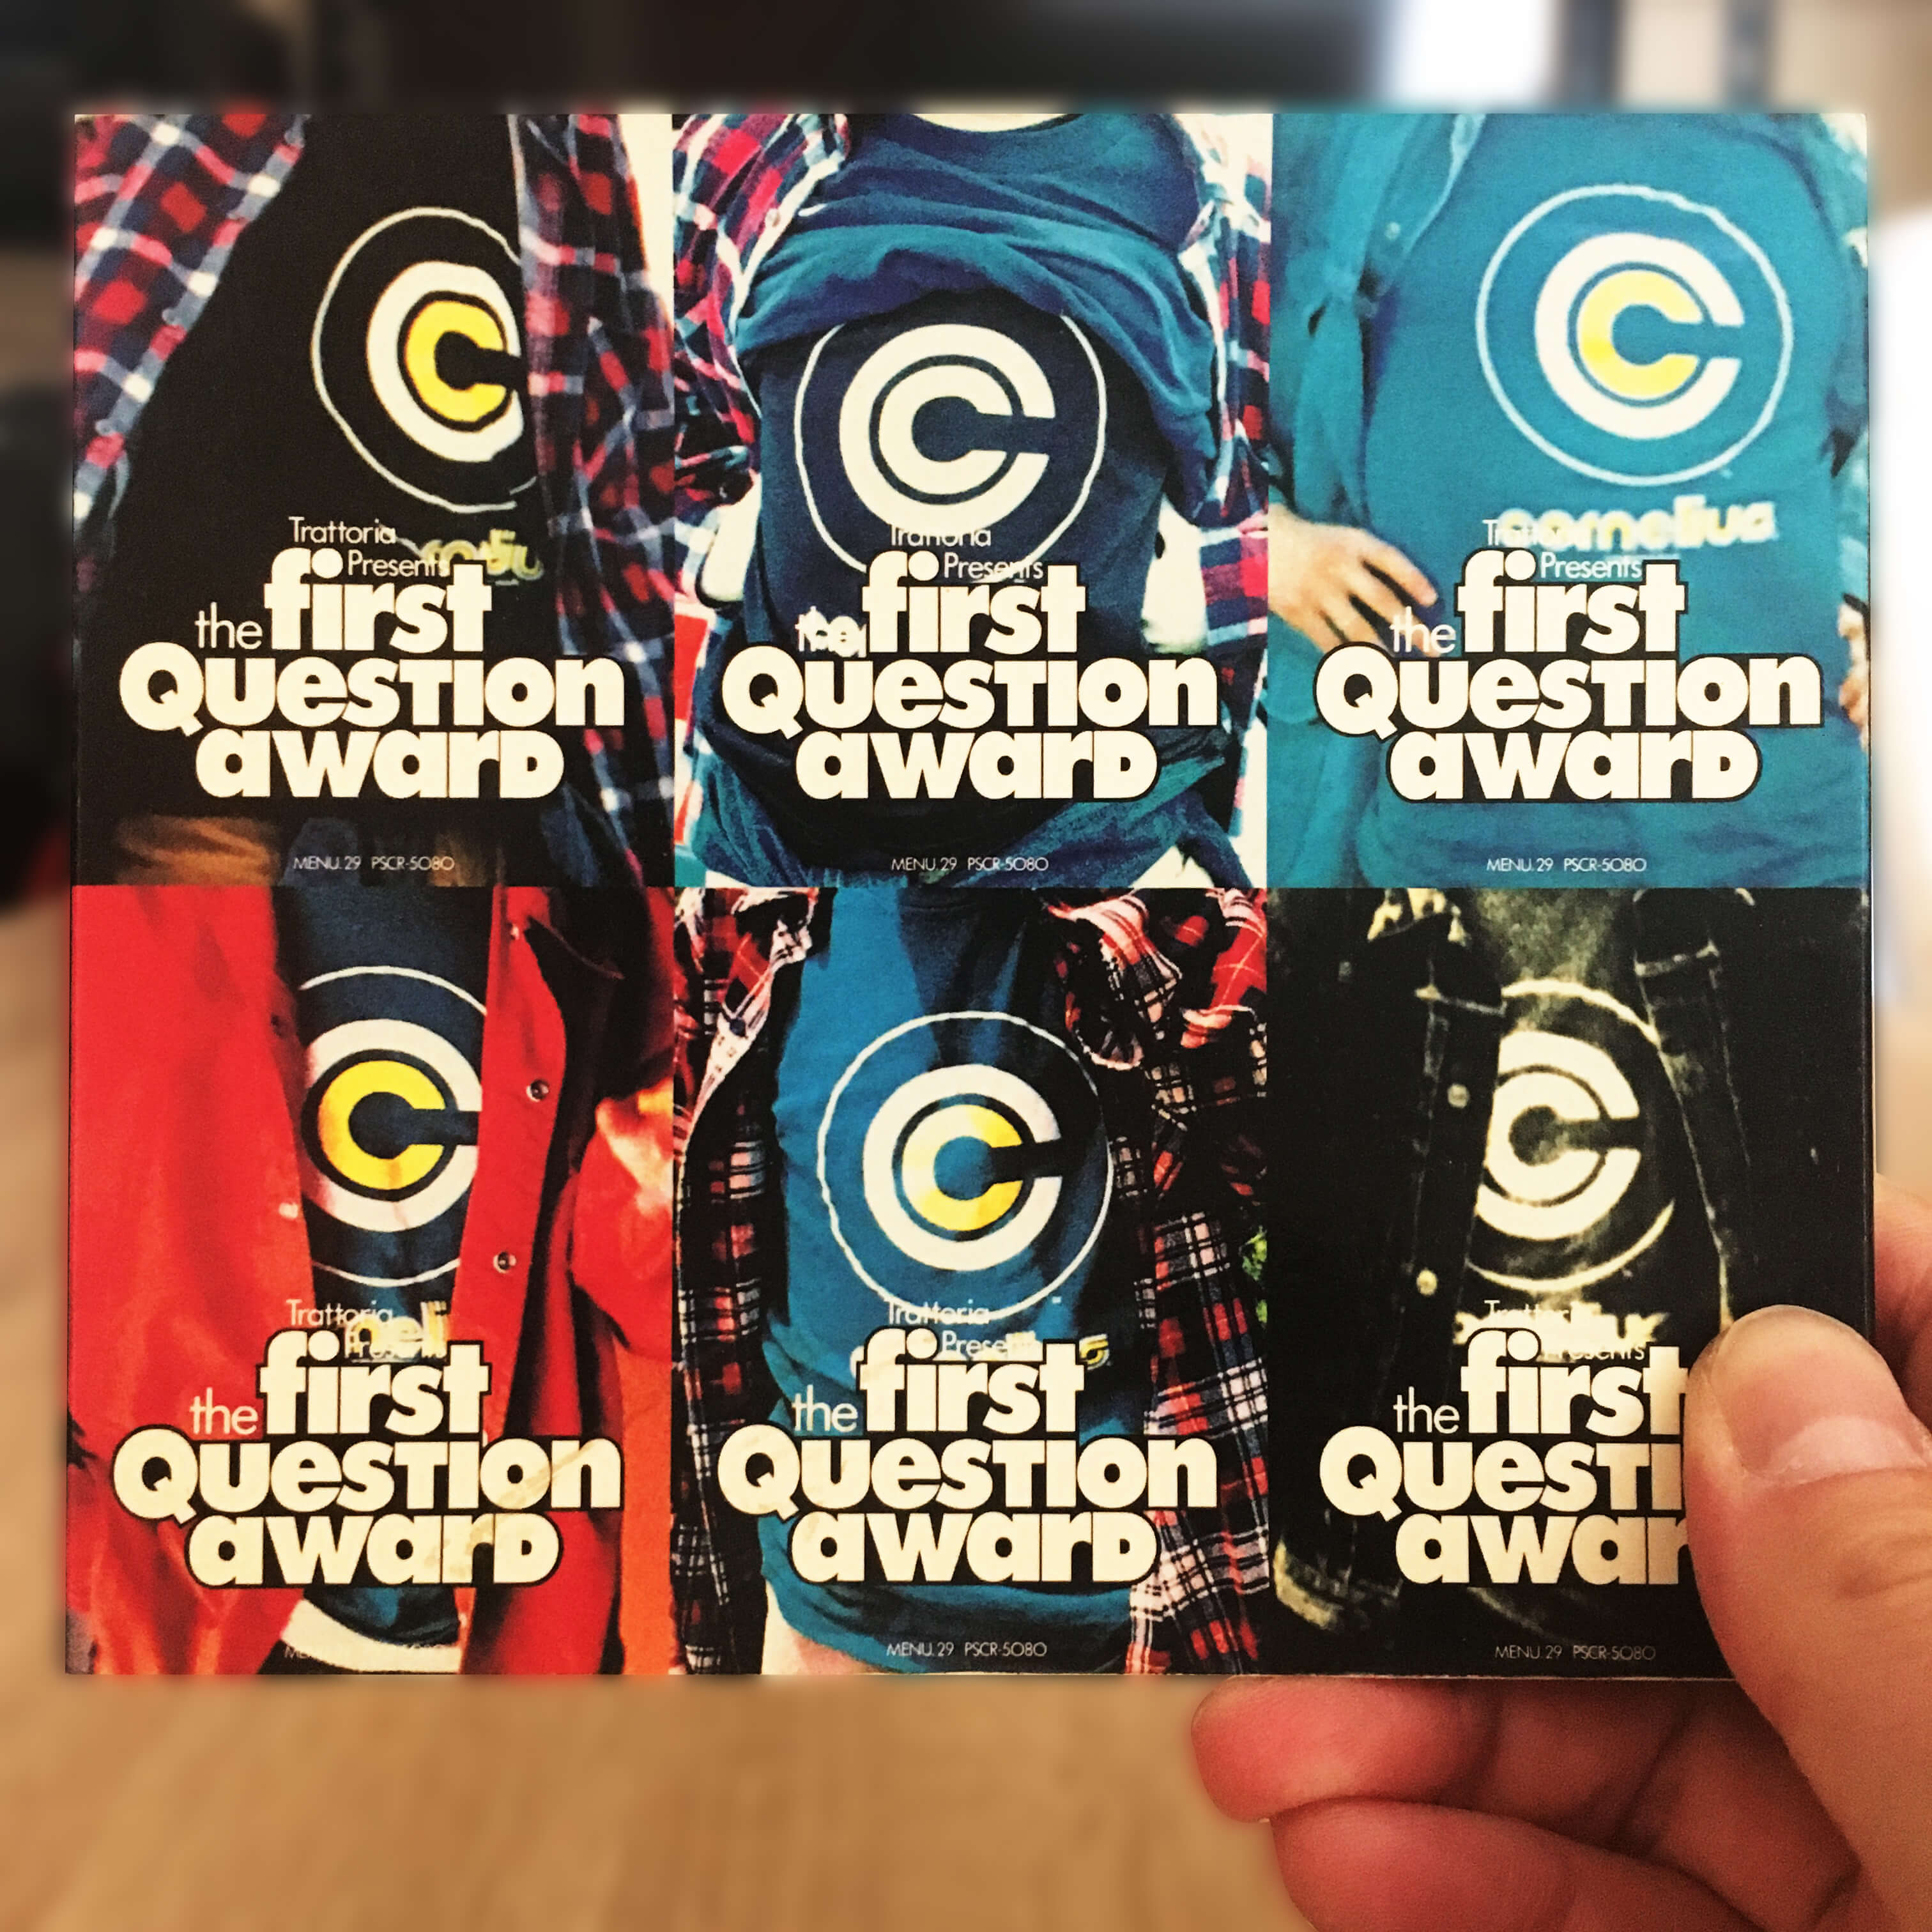 THE FIRST QUESTION AWARD